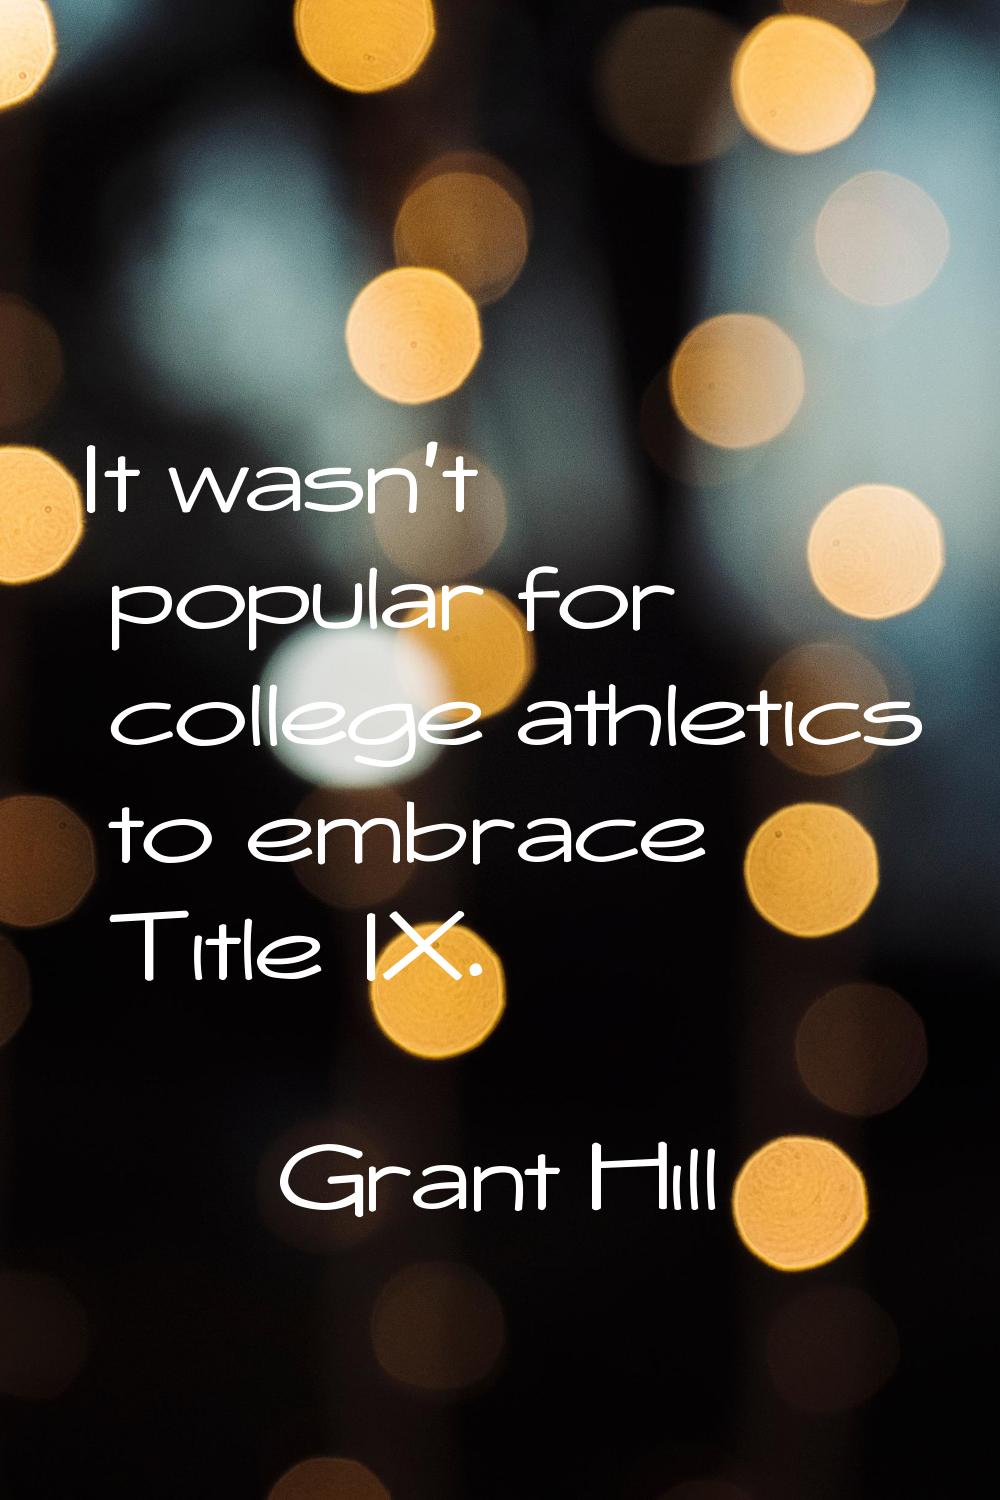 It wasn't popular for college athletics to embrace Title IX.